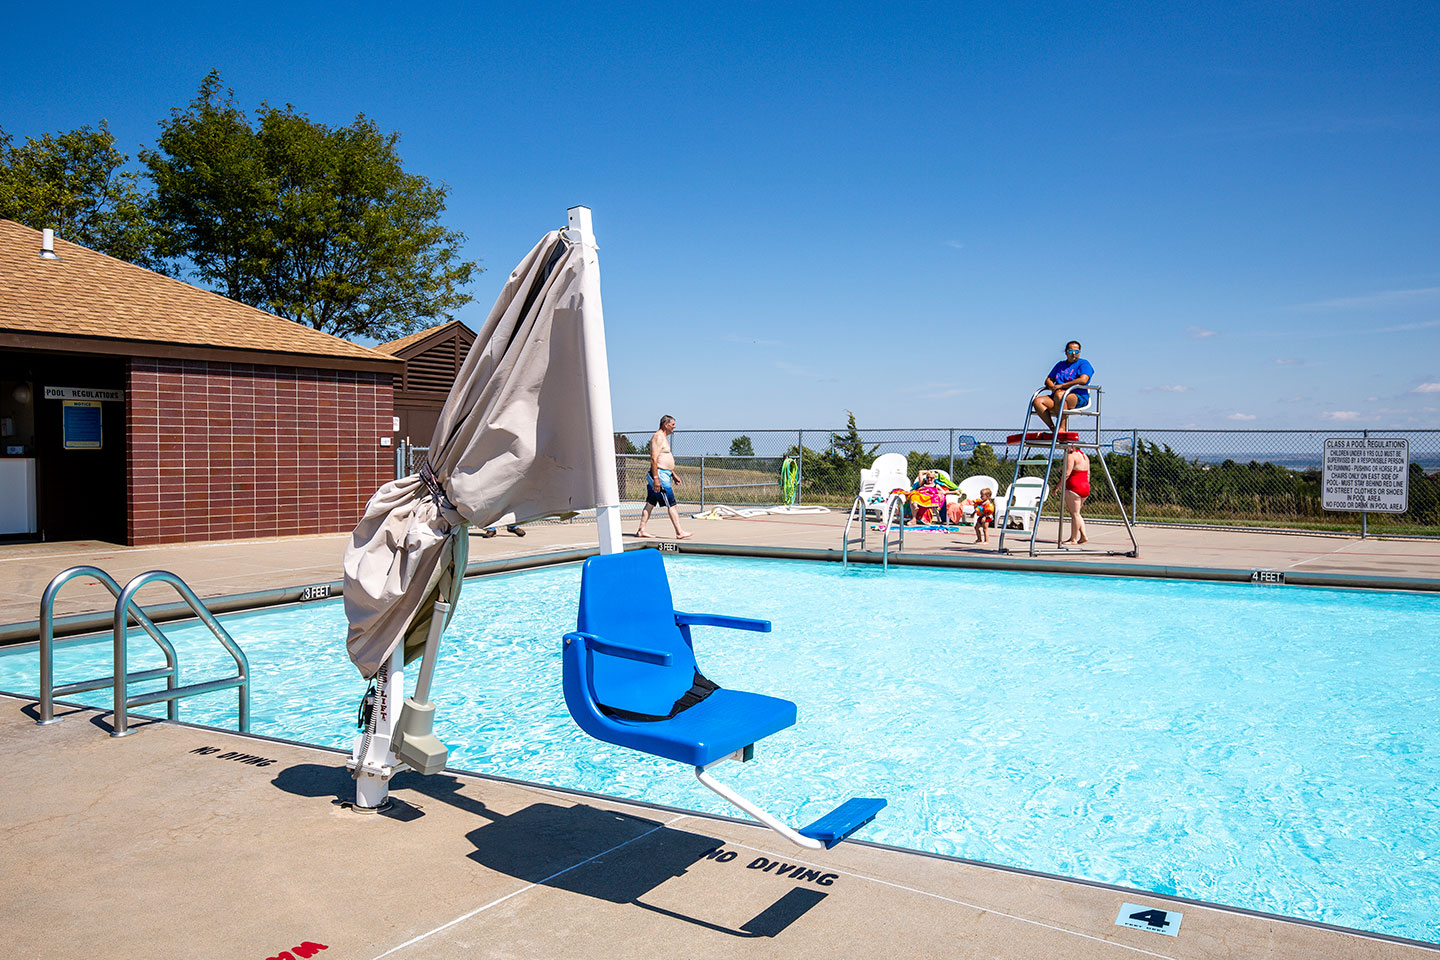 Niobrara State Park swimming pool is ADA-compliant featuring a pool lift for visitor use